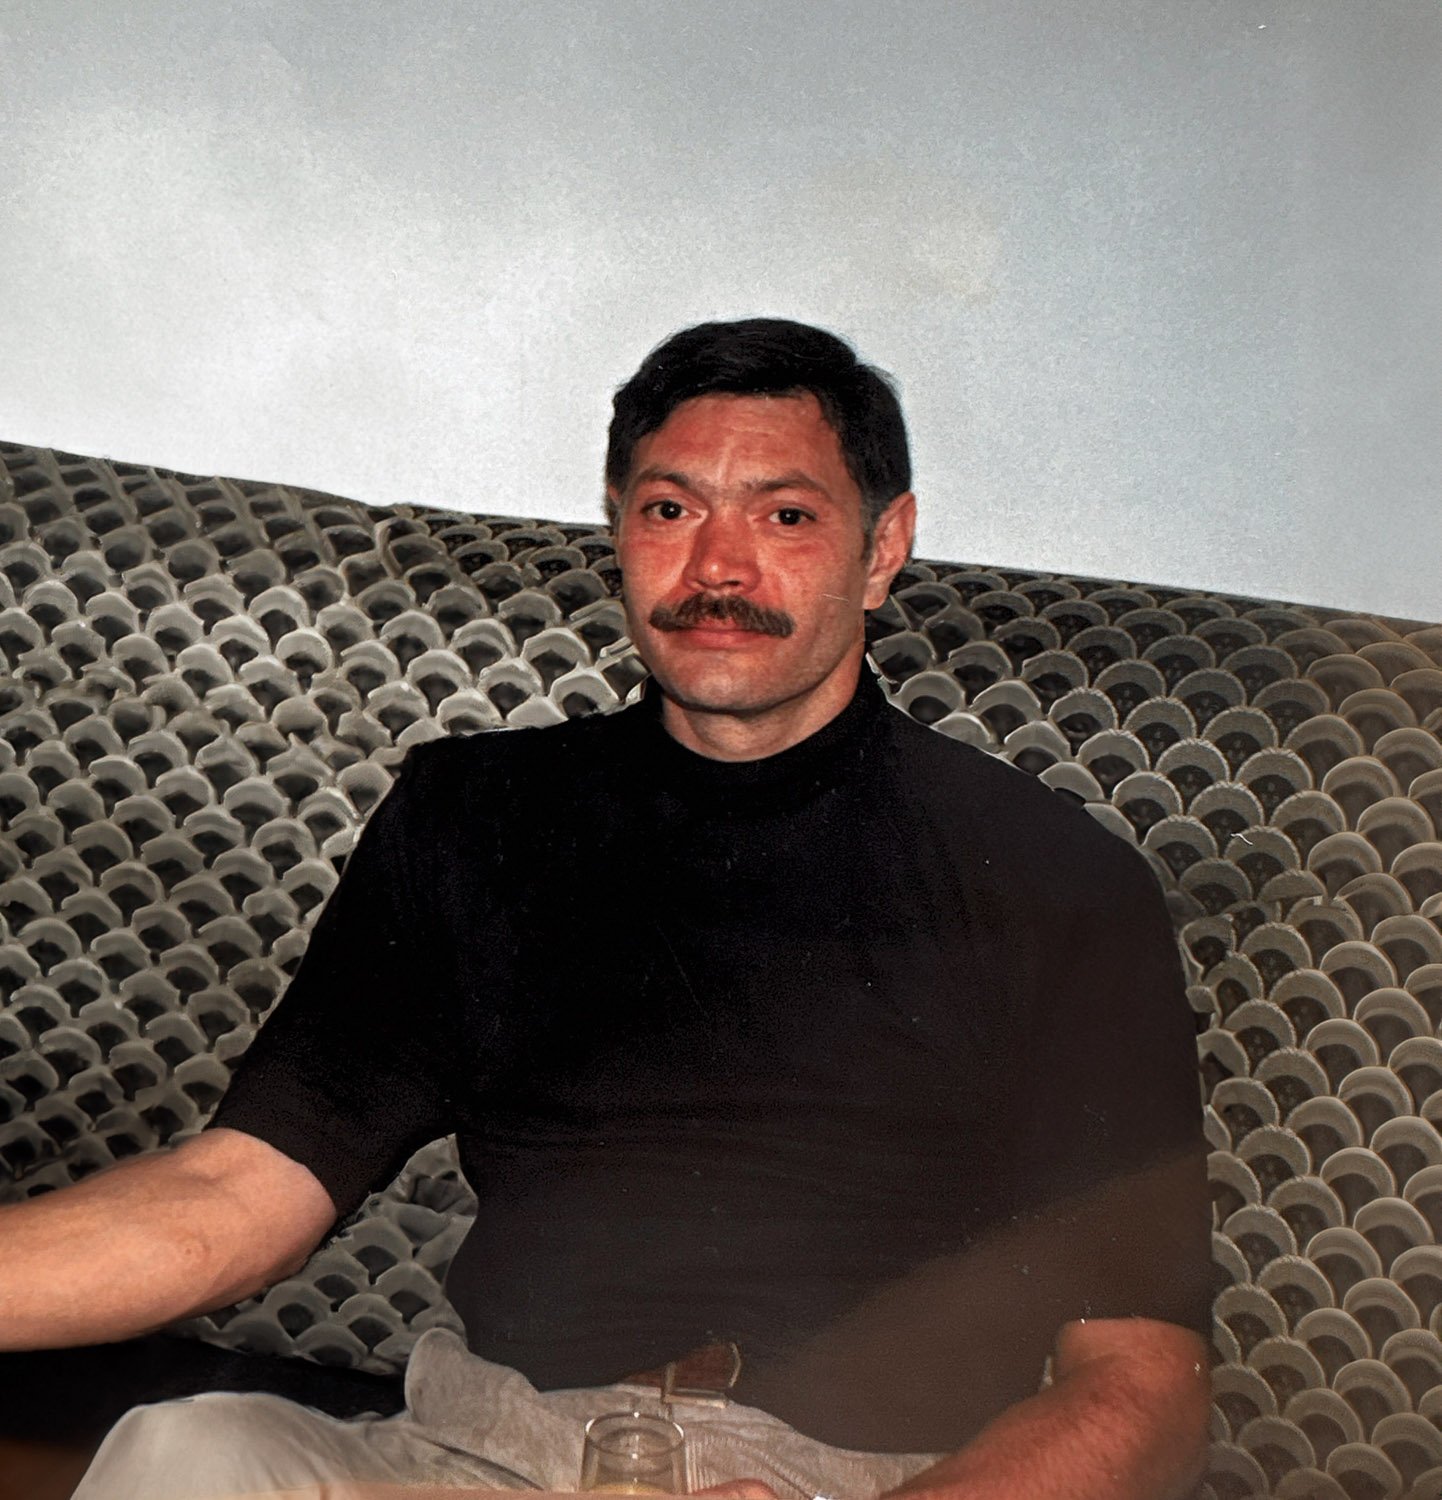 A man in a black shirt sitting inside on a couch